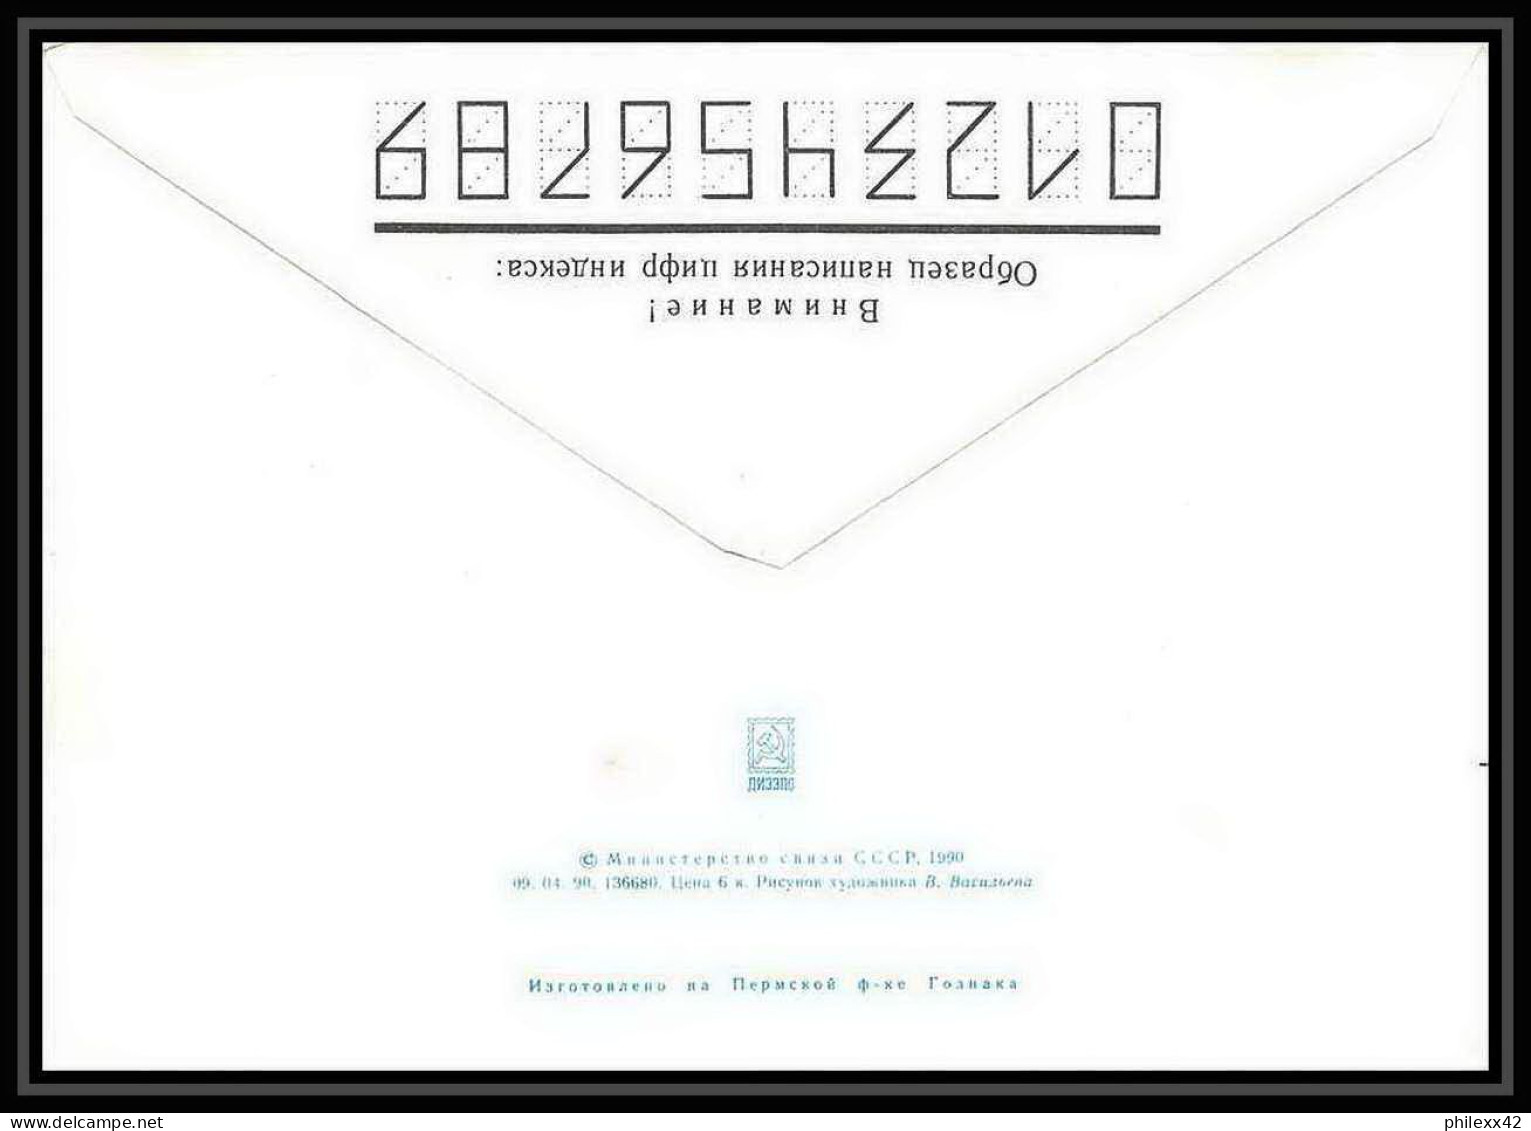 10011/ Espace (space) Entier Postal (Stamped Stationery) 23/9/1990 (urss USSR) - Russia & USSR